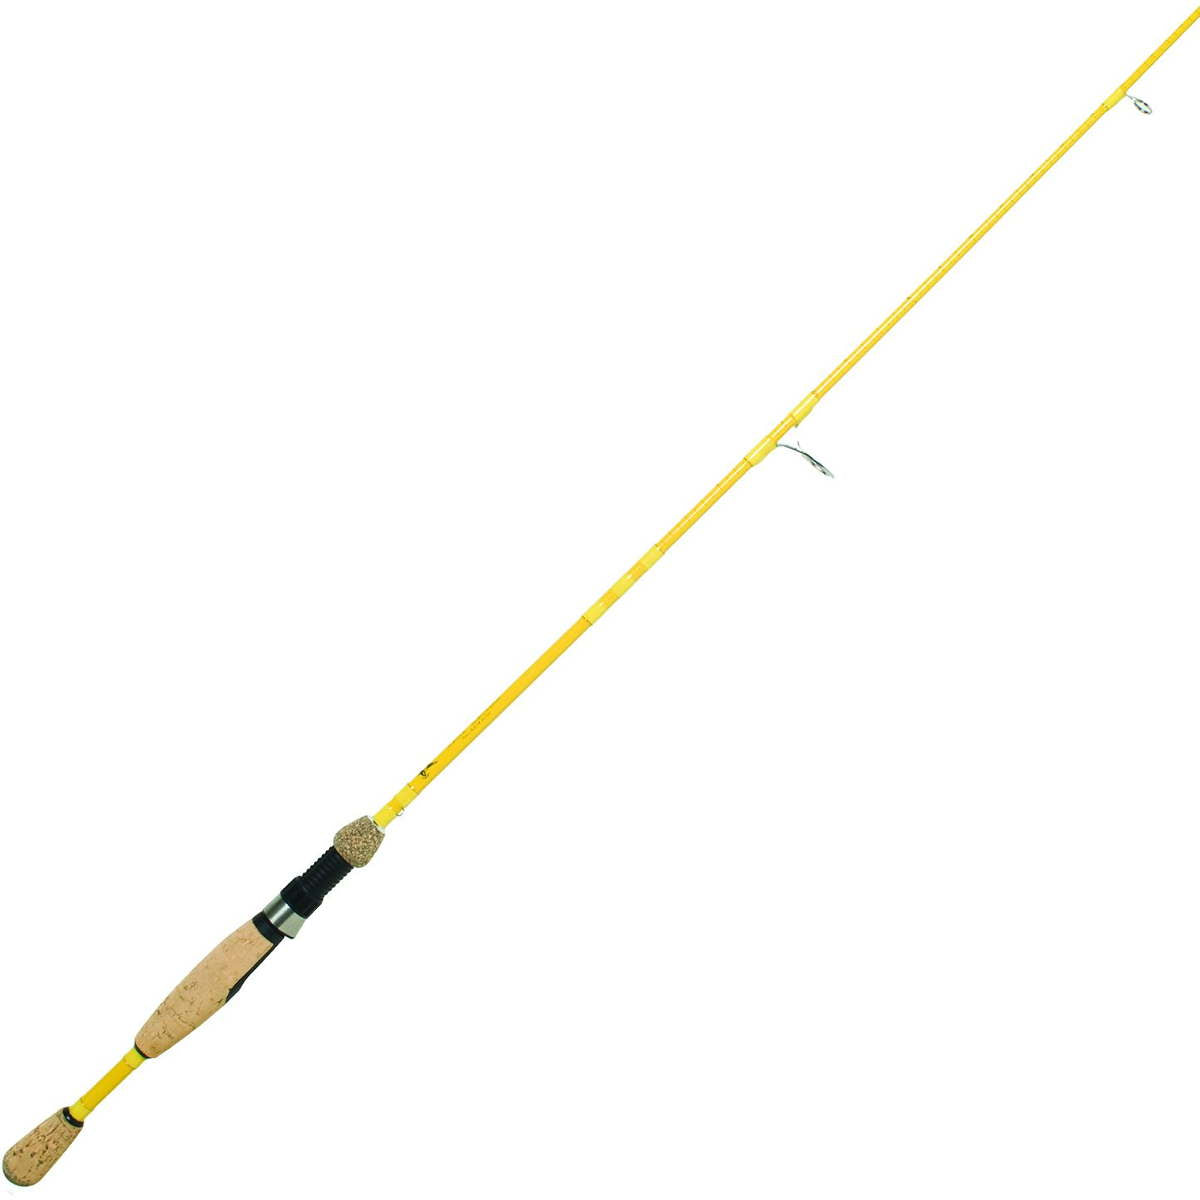 Photo of Eagle Claw Featherlight Spinning Rod for sale at United Tackle Shops.